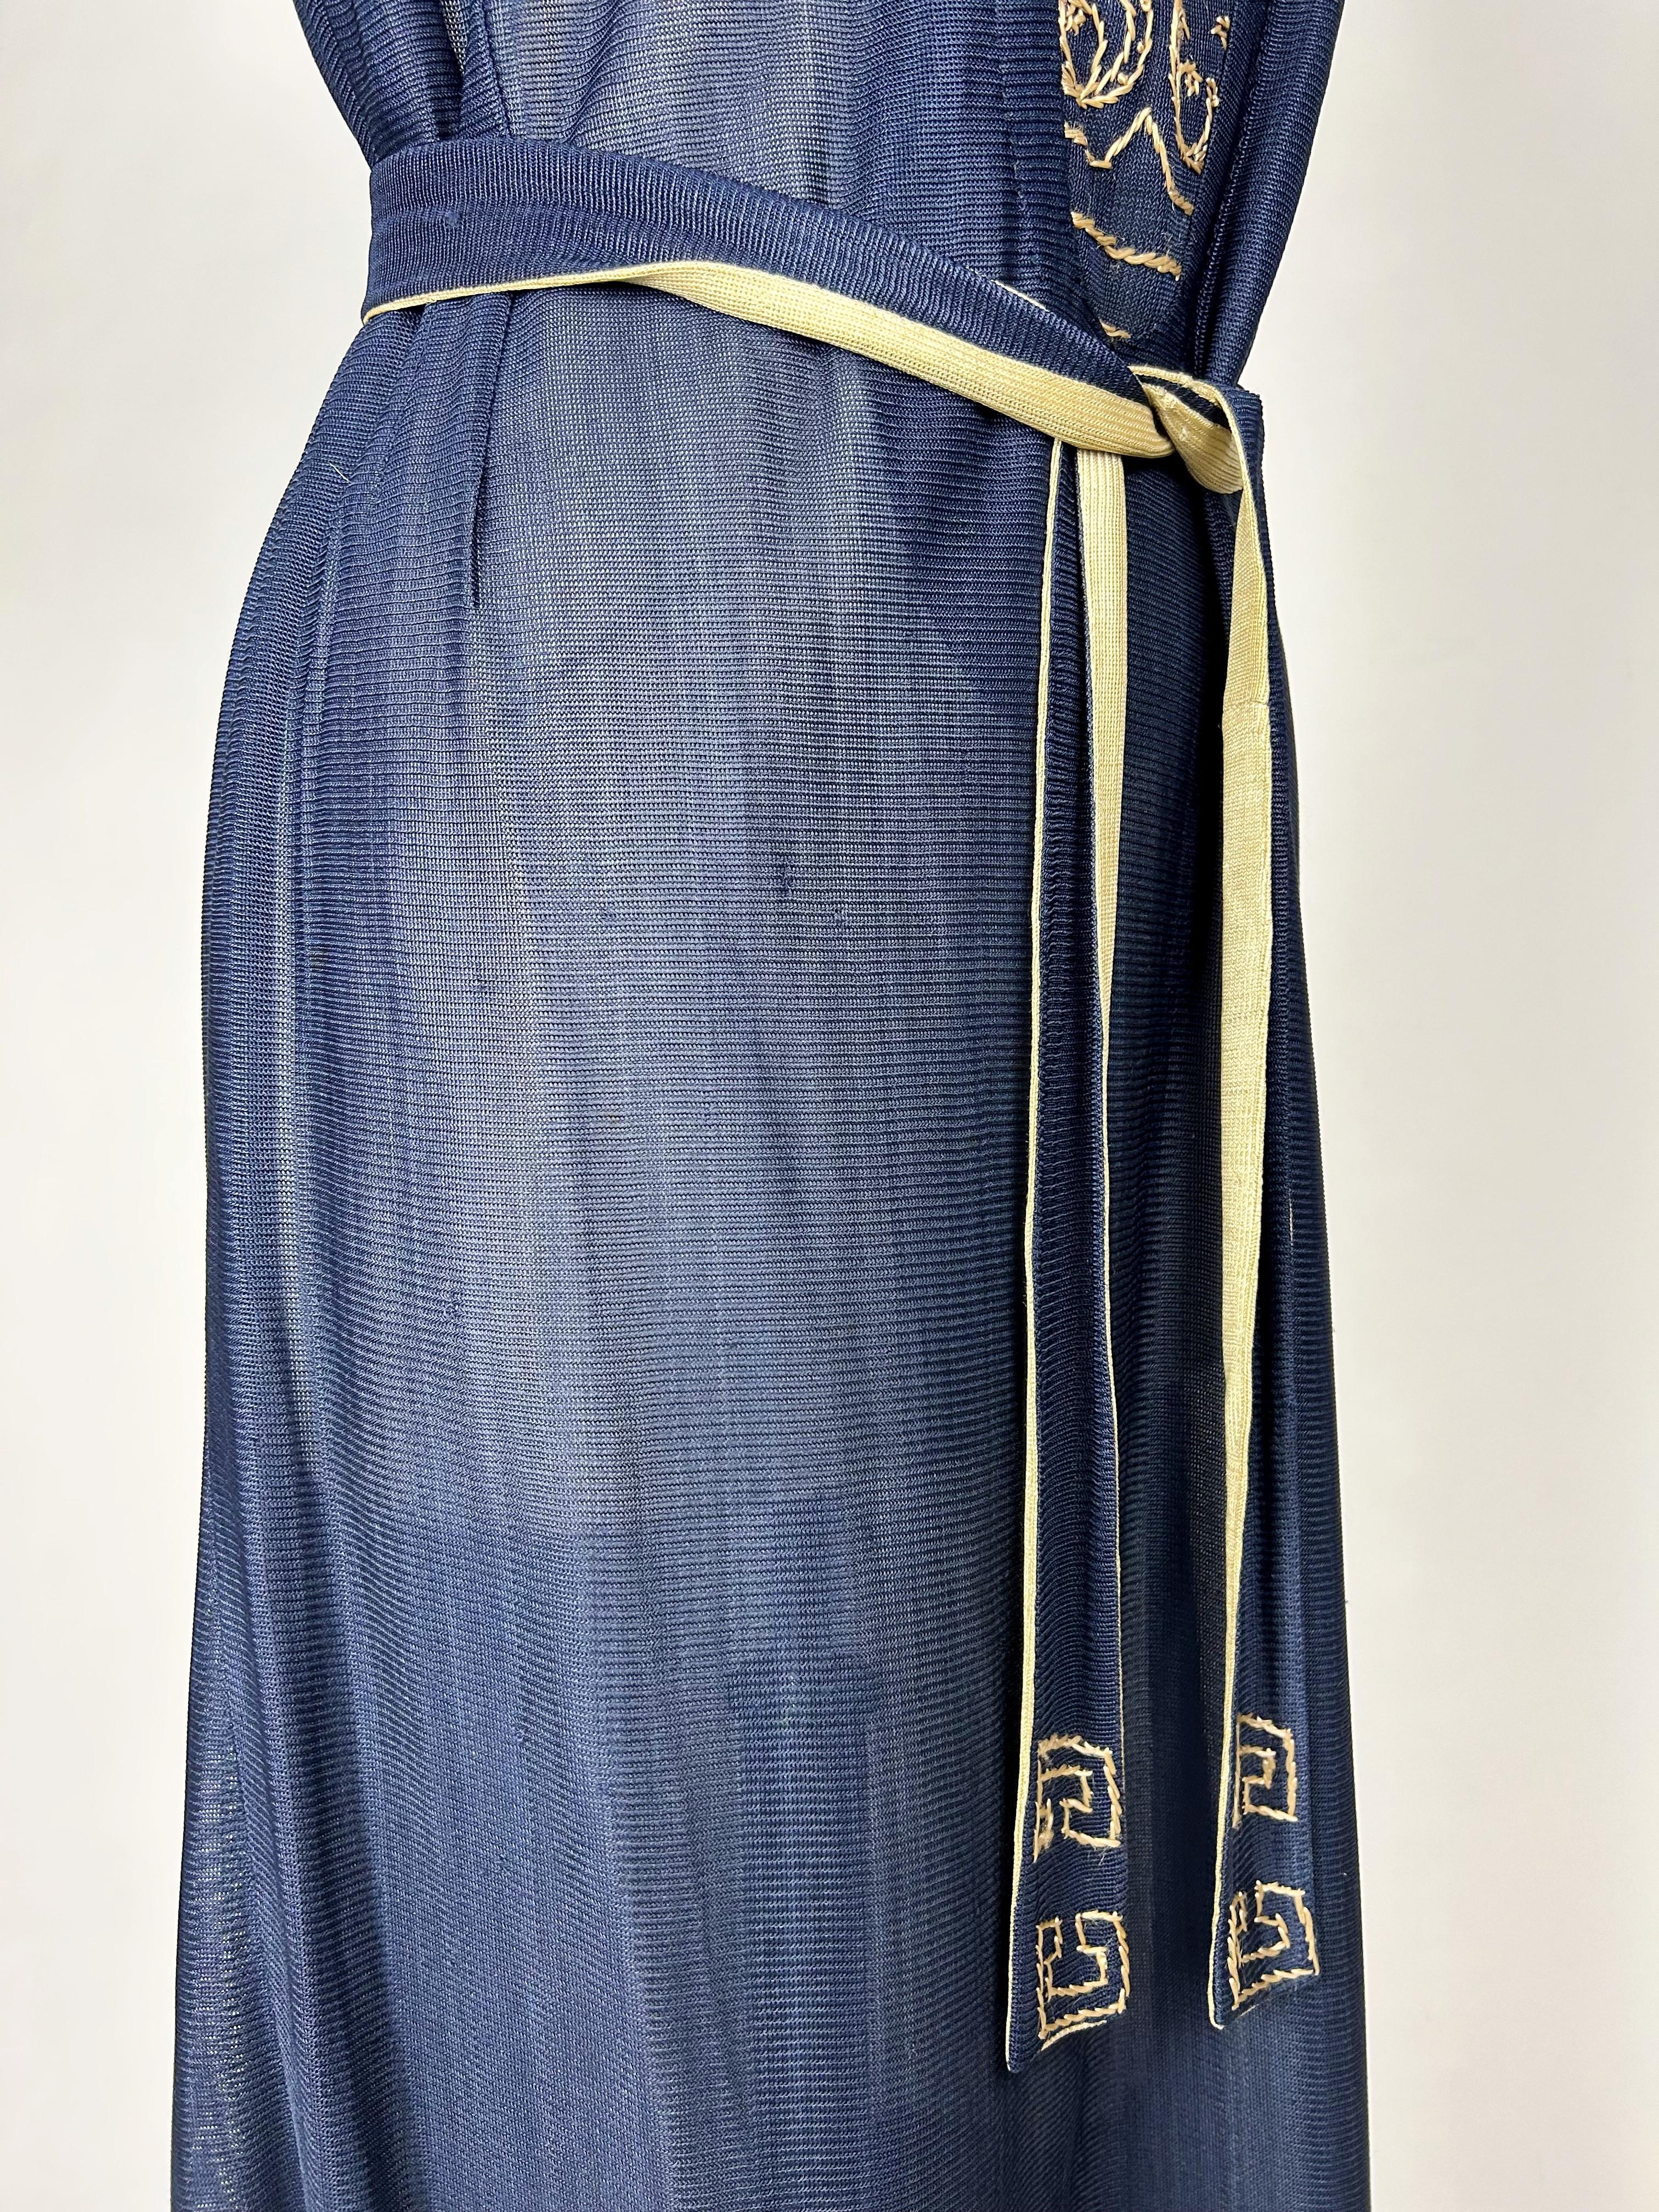 CC embroidered jersey knit silk Dress in the style of Coco Chanel France C. 1920 For Sale 8